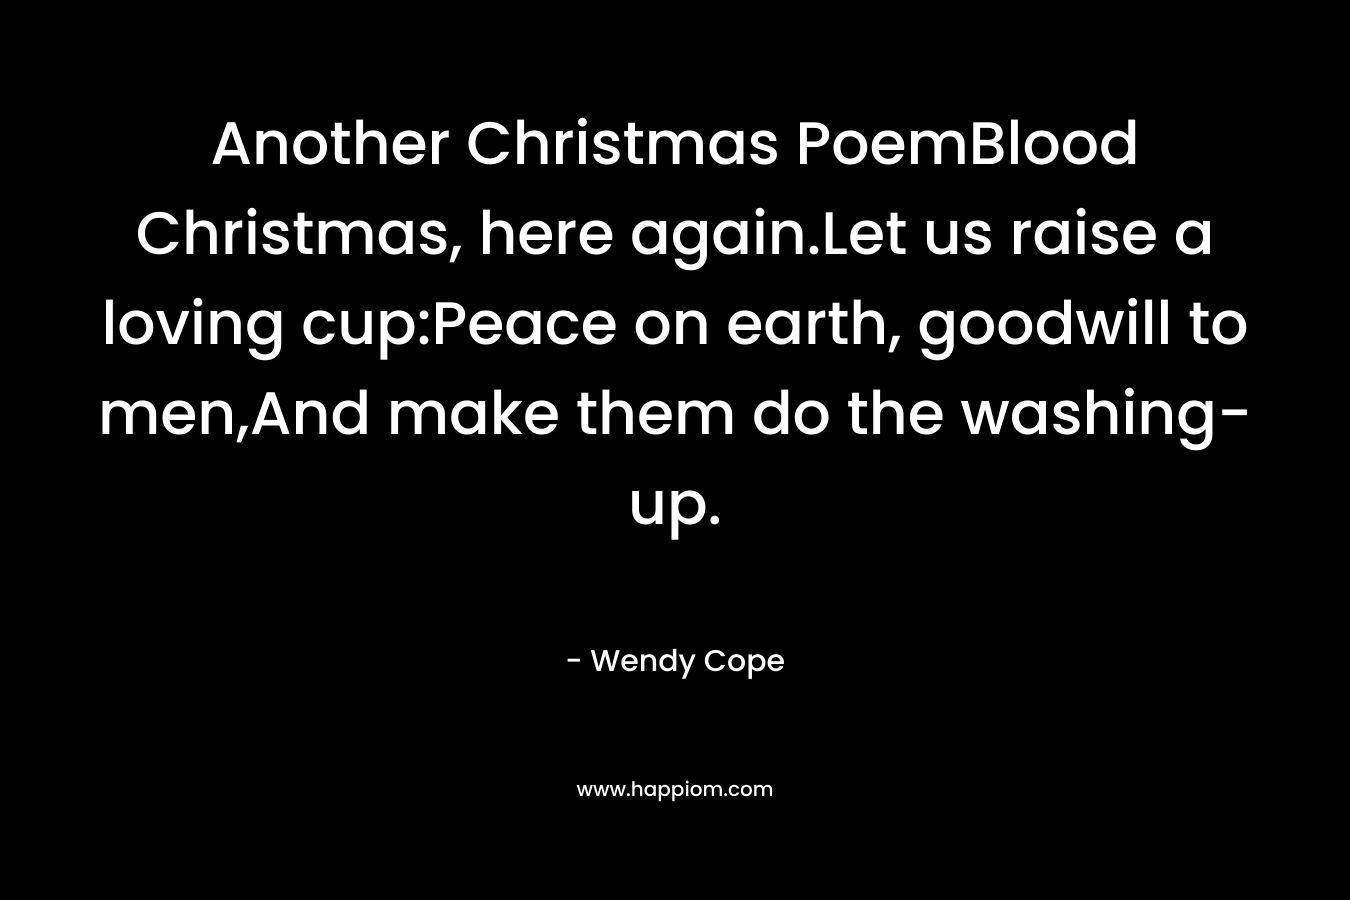 Another Christmas PoemBlood Christmas, here again.Let us raise a loving cup:Peace on earth, goodwill to men,And make them do the washing-up.